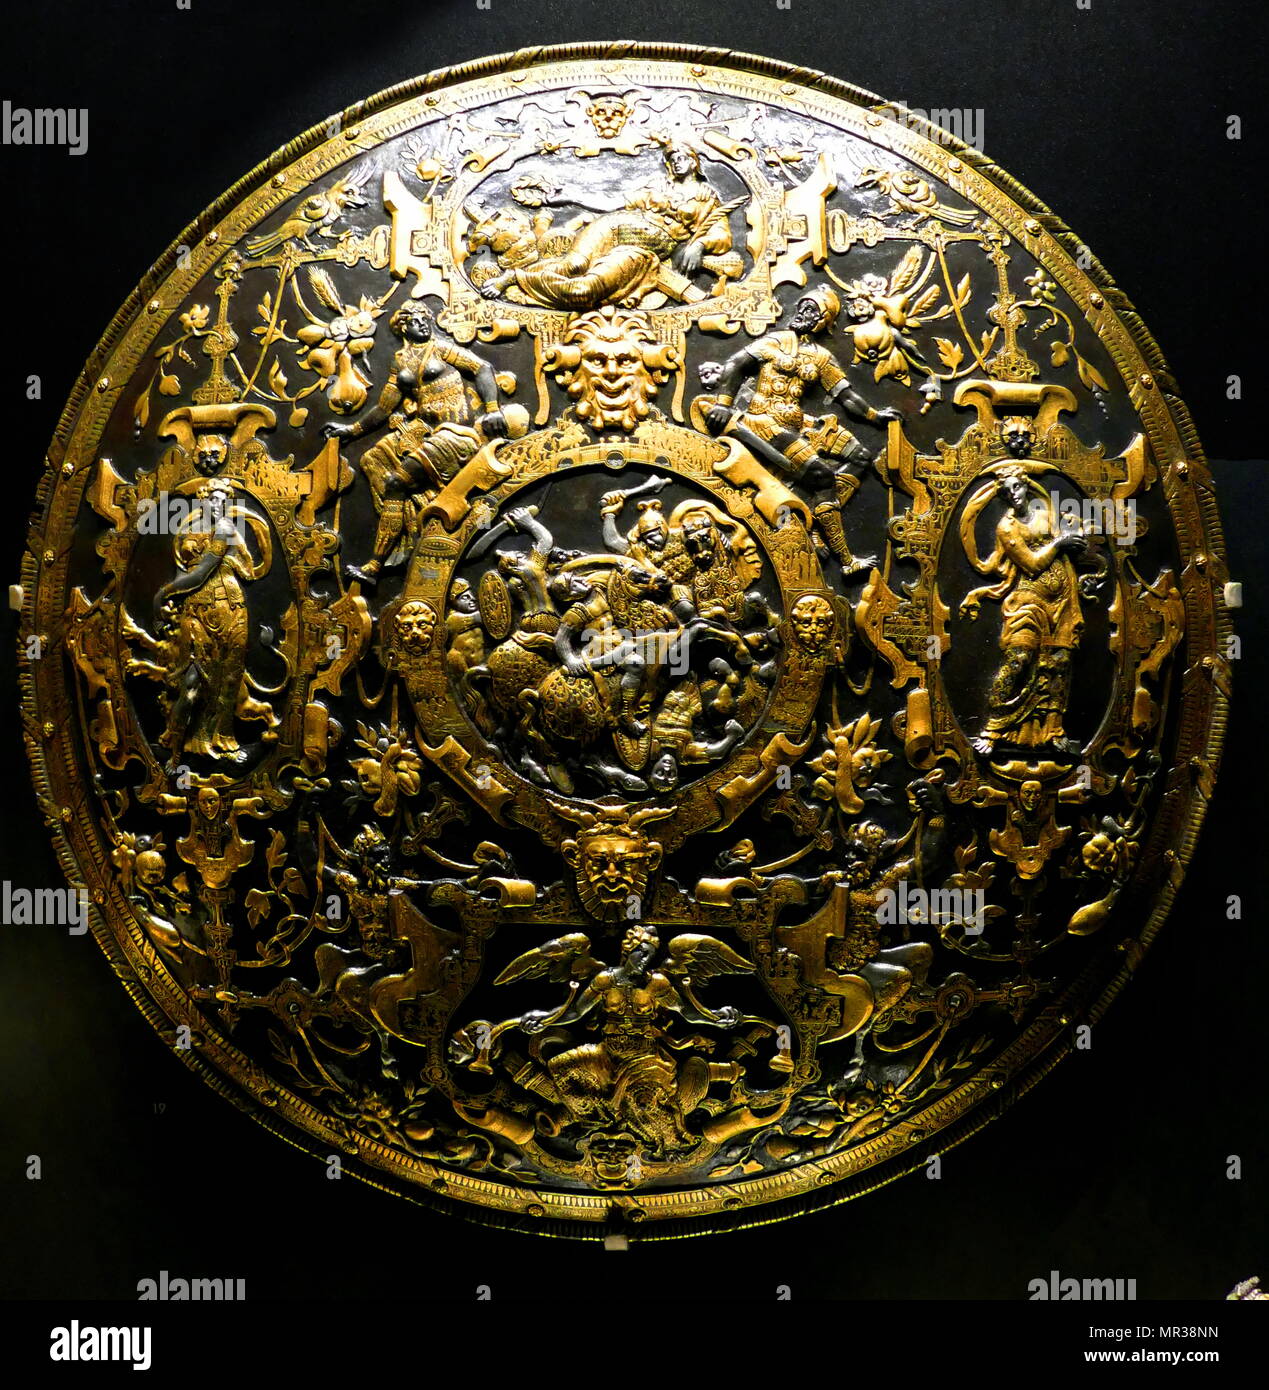 parade shield, dated 1554 by Giorgio Ghisi (1520 — 1582), Italian engraver from Mantua who also worked in Antwerp and in France. The shield, now part of the Waddesdon Bequest, is made of iron, hammered in relief, damascened with gold and partly plated with silver. It has an intricate design with a scene of battling horseman in the centre, within a frame, around which are four further frames containing allegorical female figures, the frames themselves incorporating minute subjects from the Iliad and ancient mythology, inlaid in gold. Stock Photo